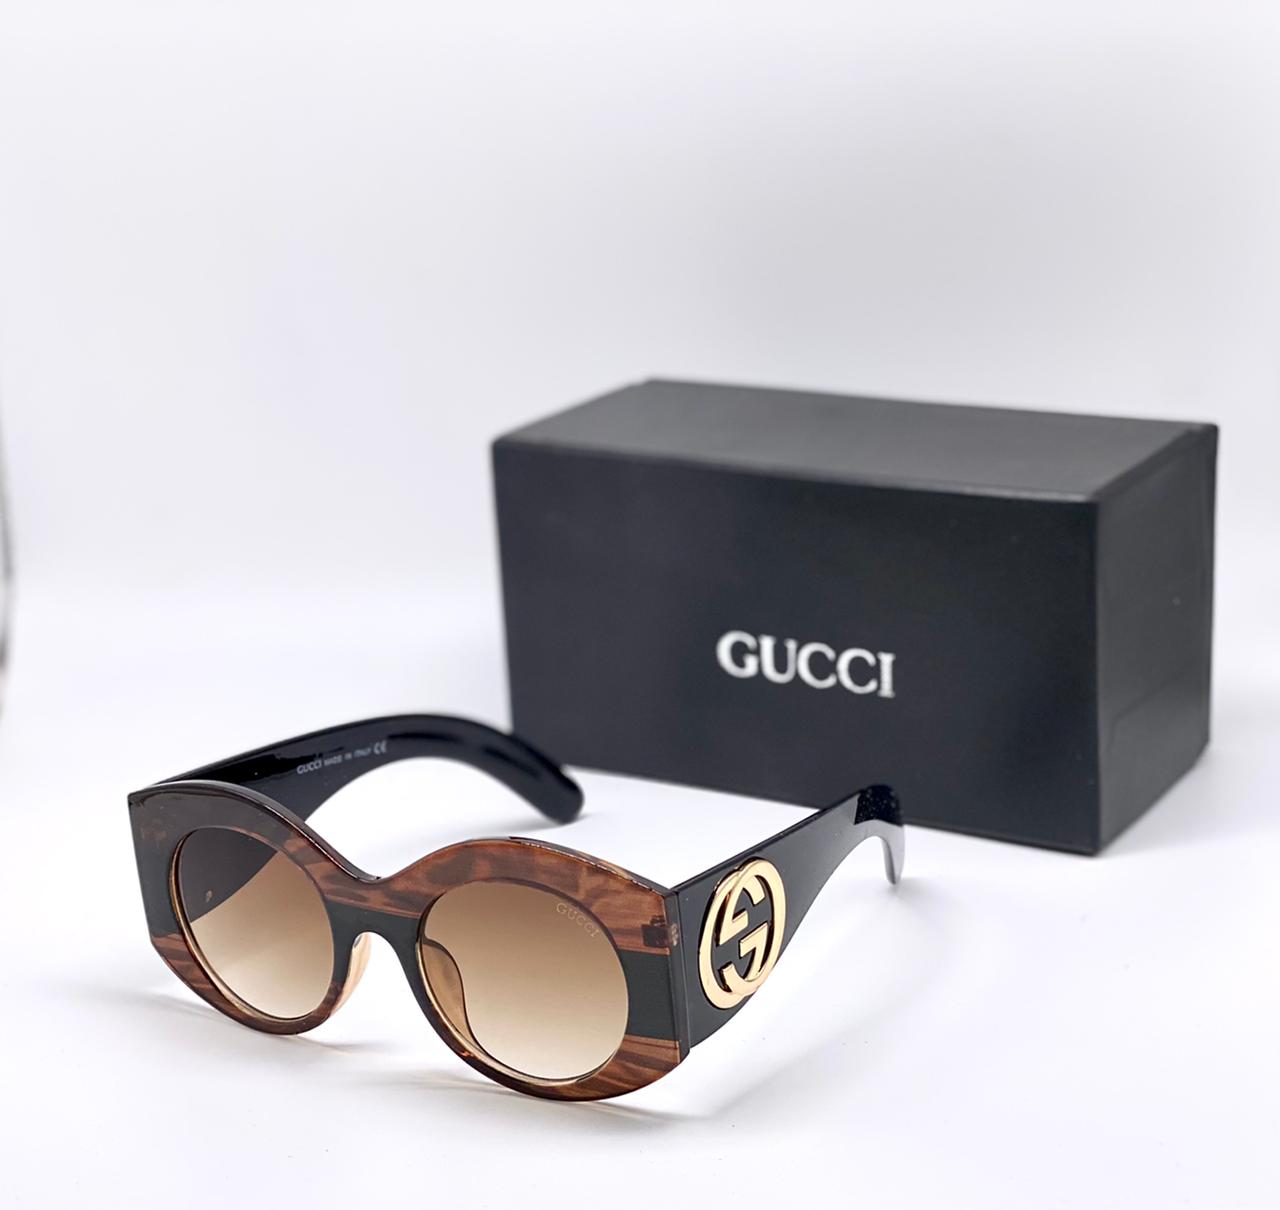 Gucci Branded Black Brown Color Shade Glass With Brown Transparent Glass Men's Women's Sunglass For Man Woman Or Girl Gg-0177S Urban Web Block Diva Flat Oversized Sunglasses